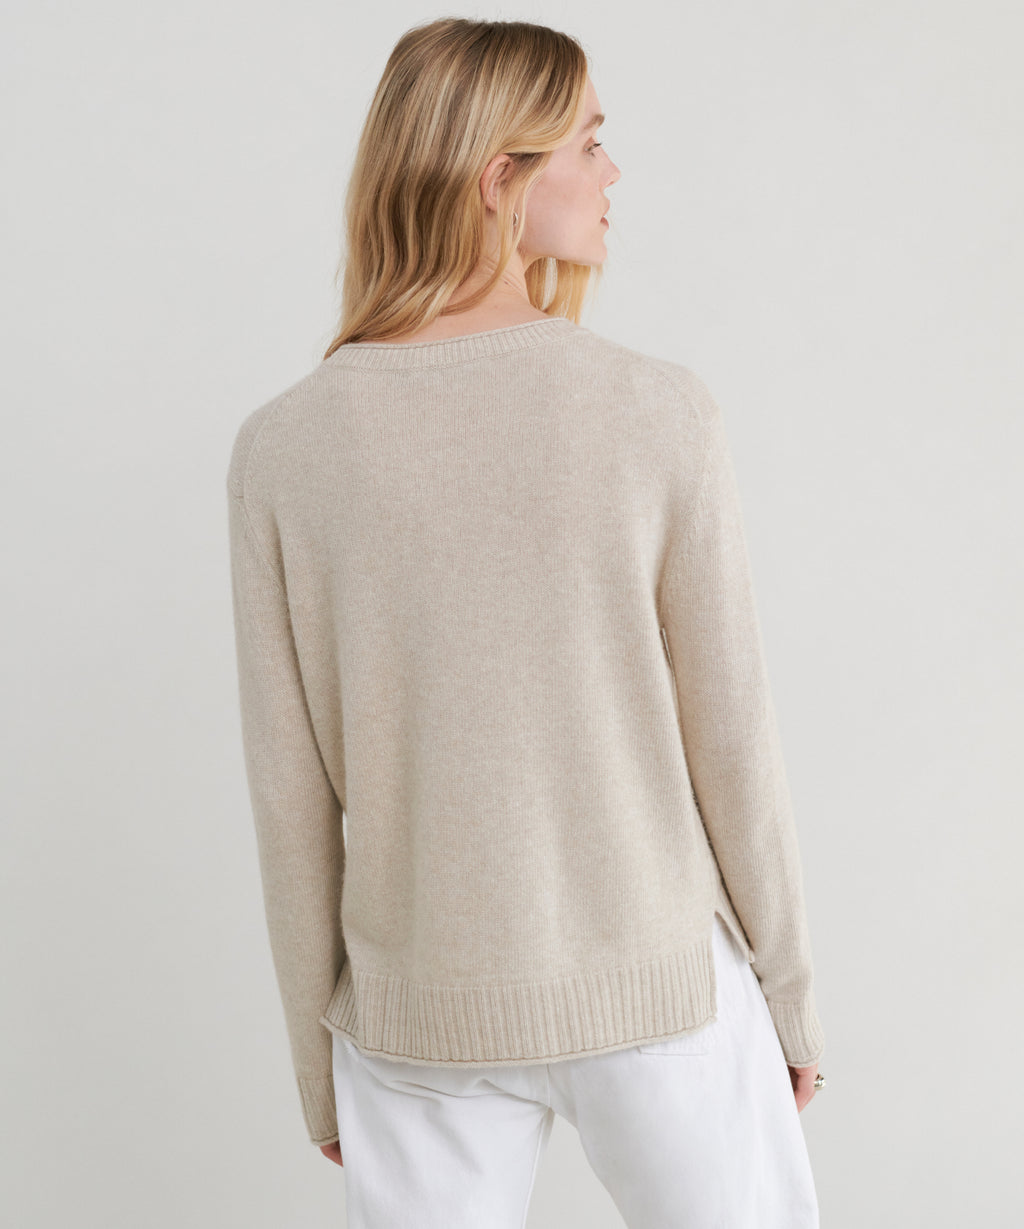 Feeling So Chipper Oatmeal Brown Cowl Neck Sweater